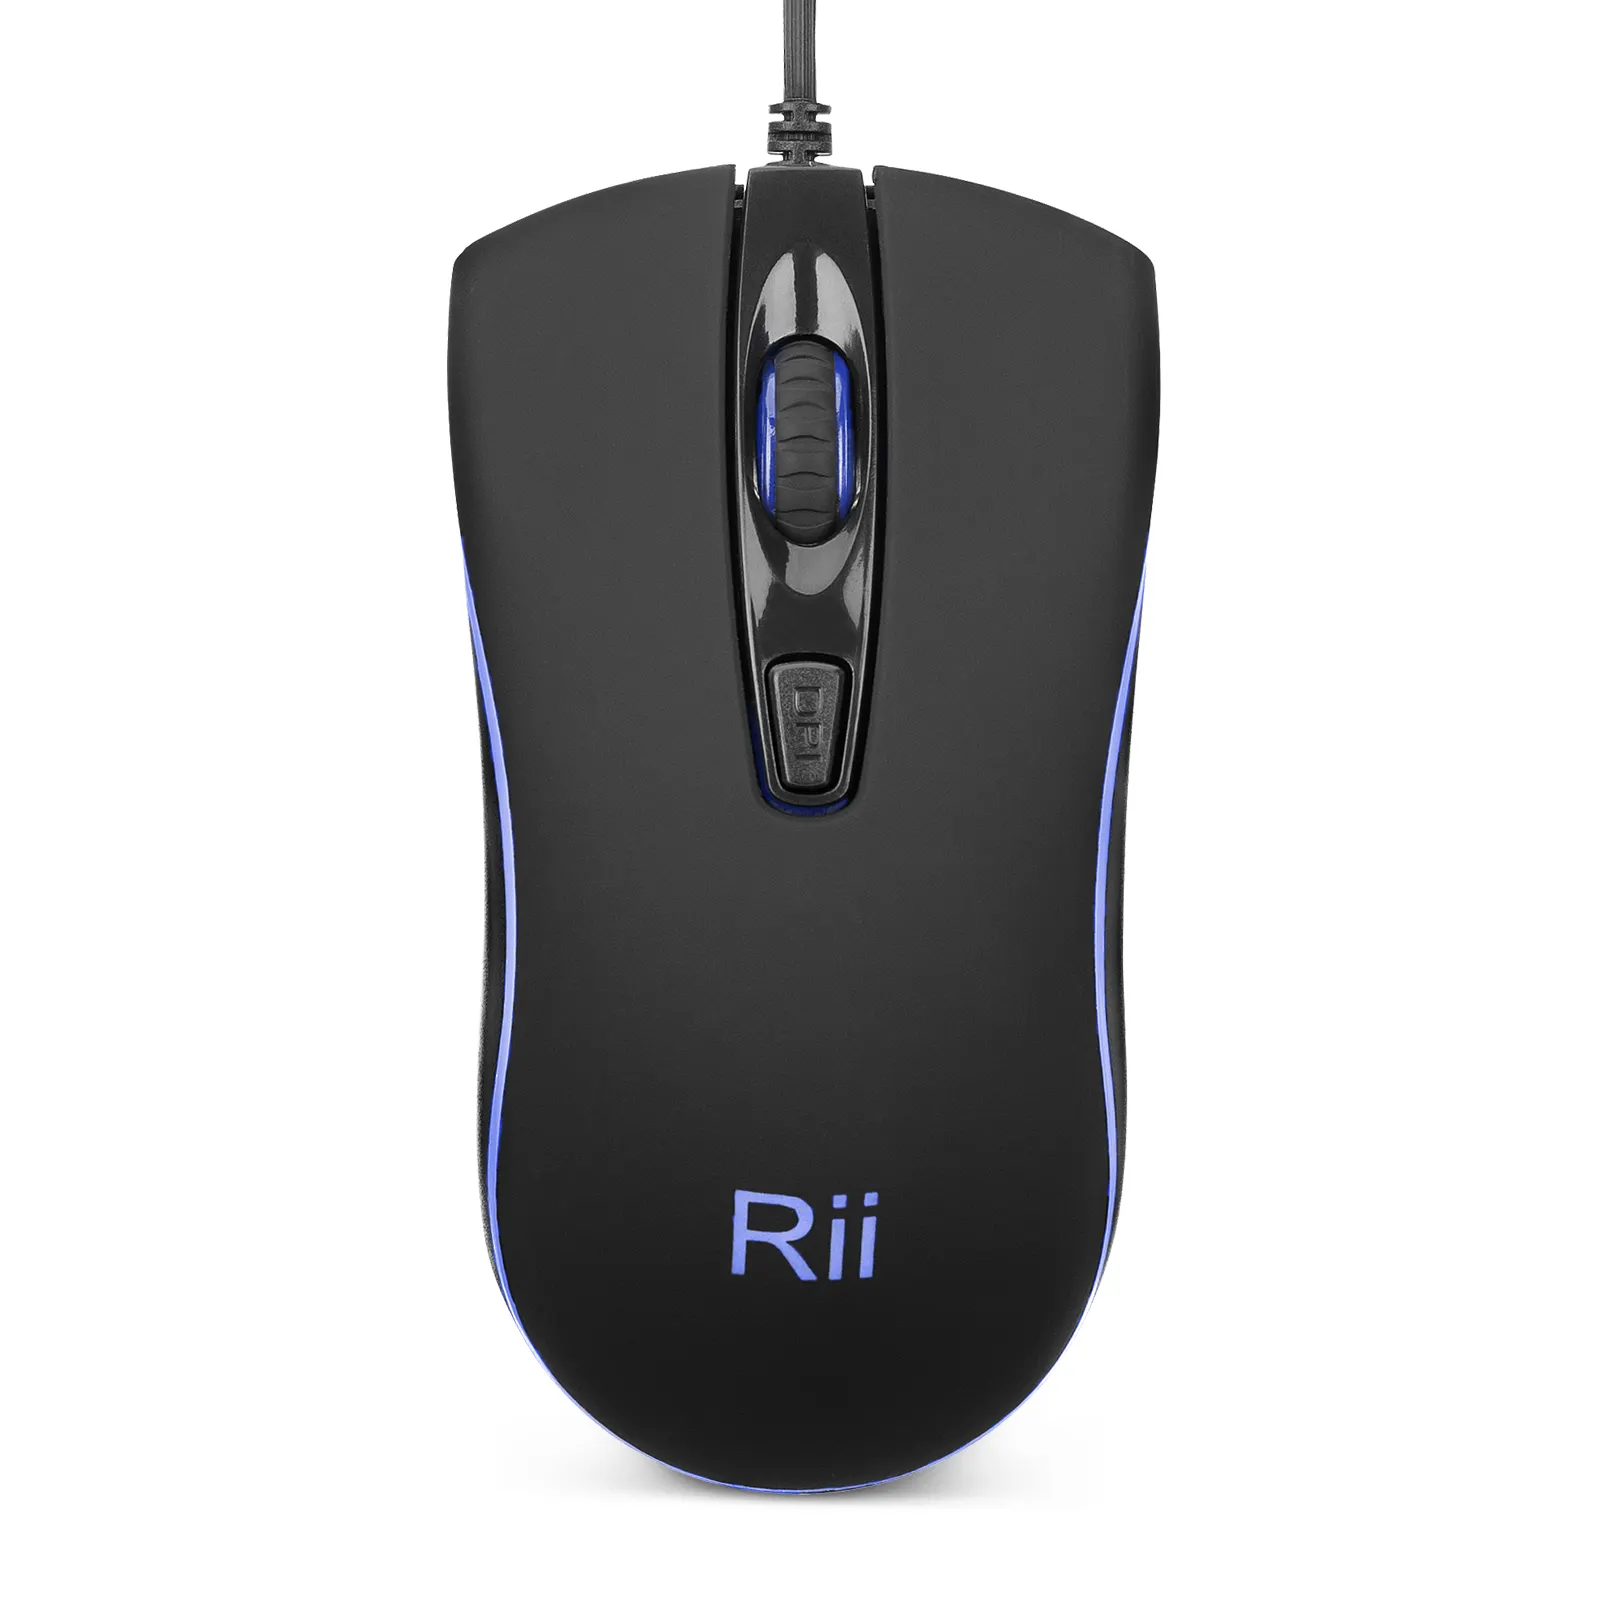 Wired Mouse Rii RM105 USB Computer Mouse Blue LED Optical 1600 DPI Office Mice for PC Computer Laptop Desktop Windows